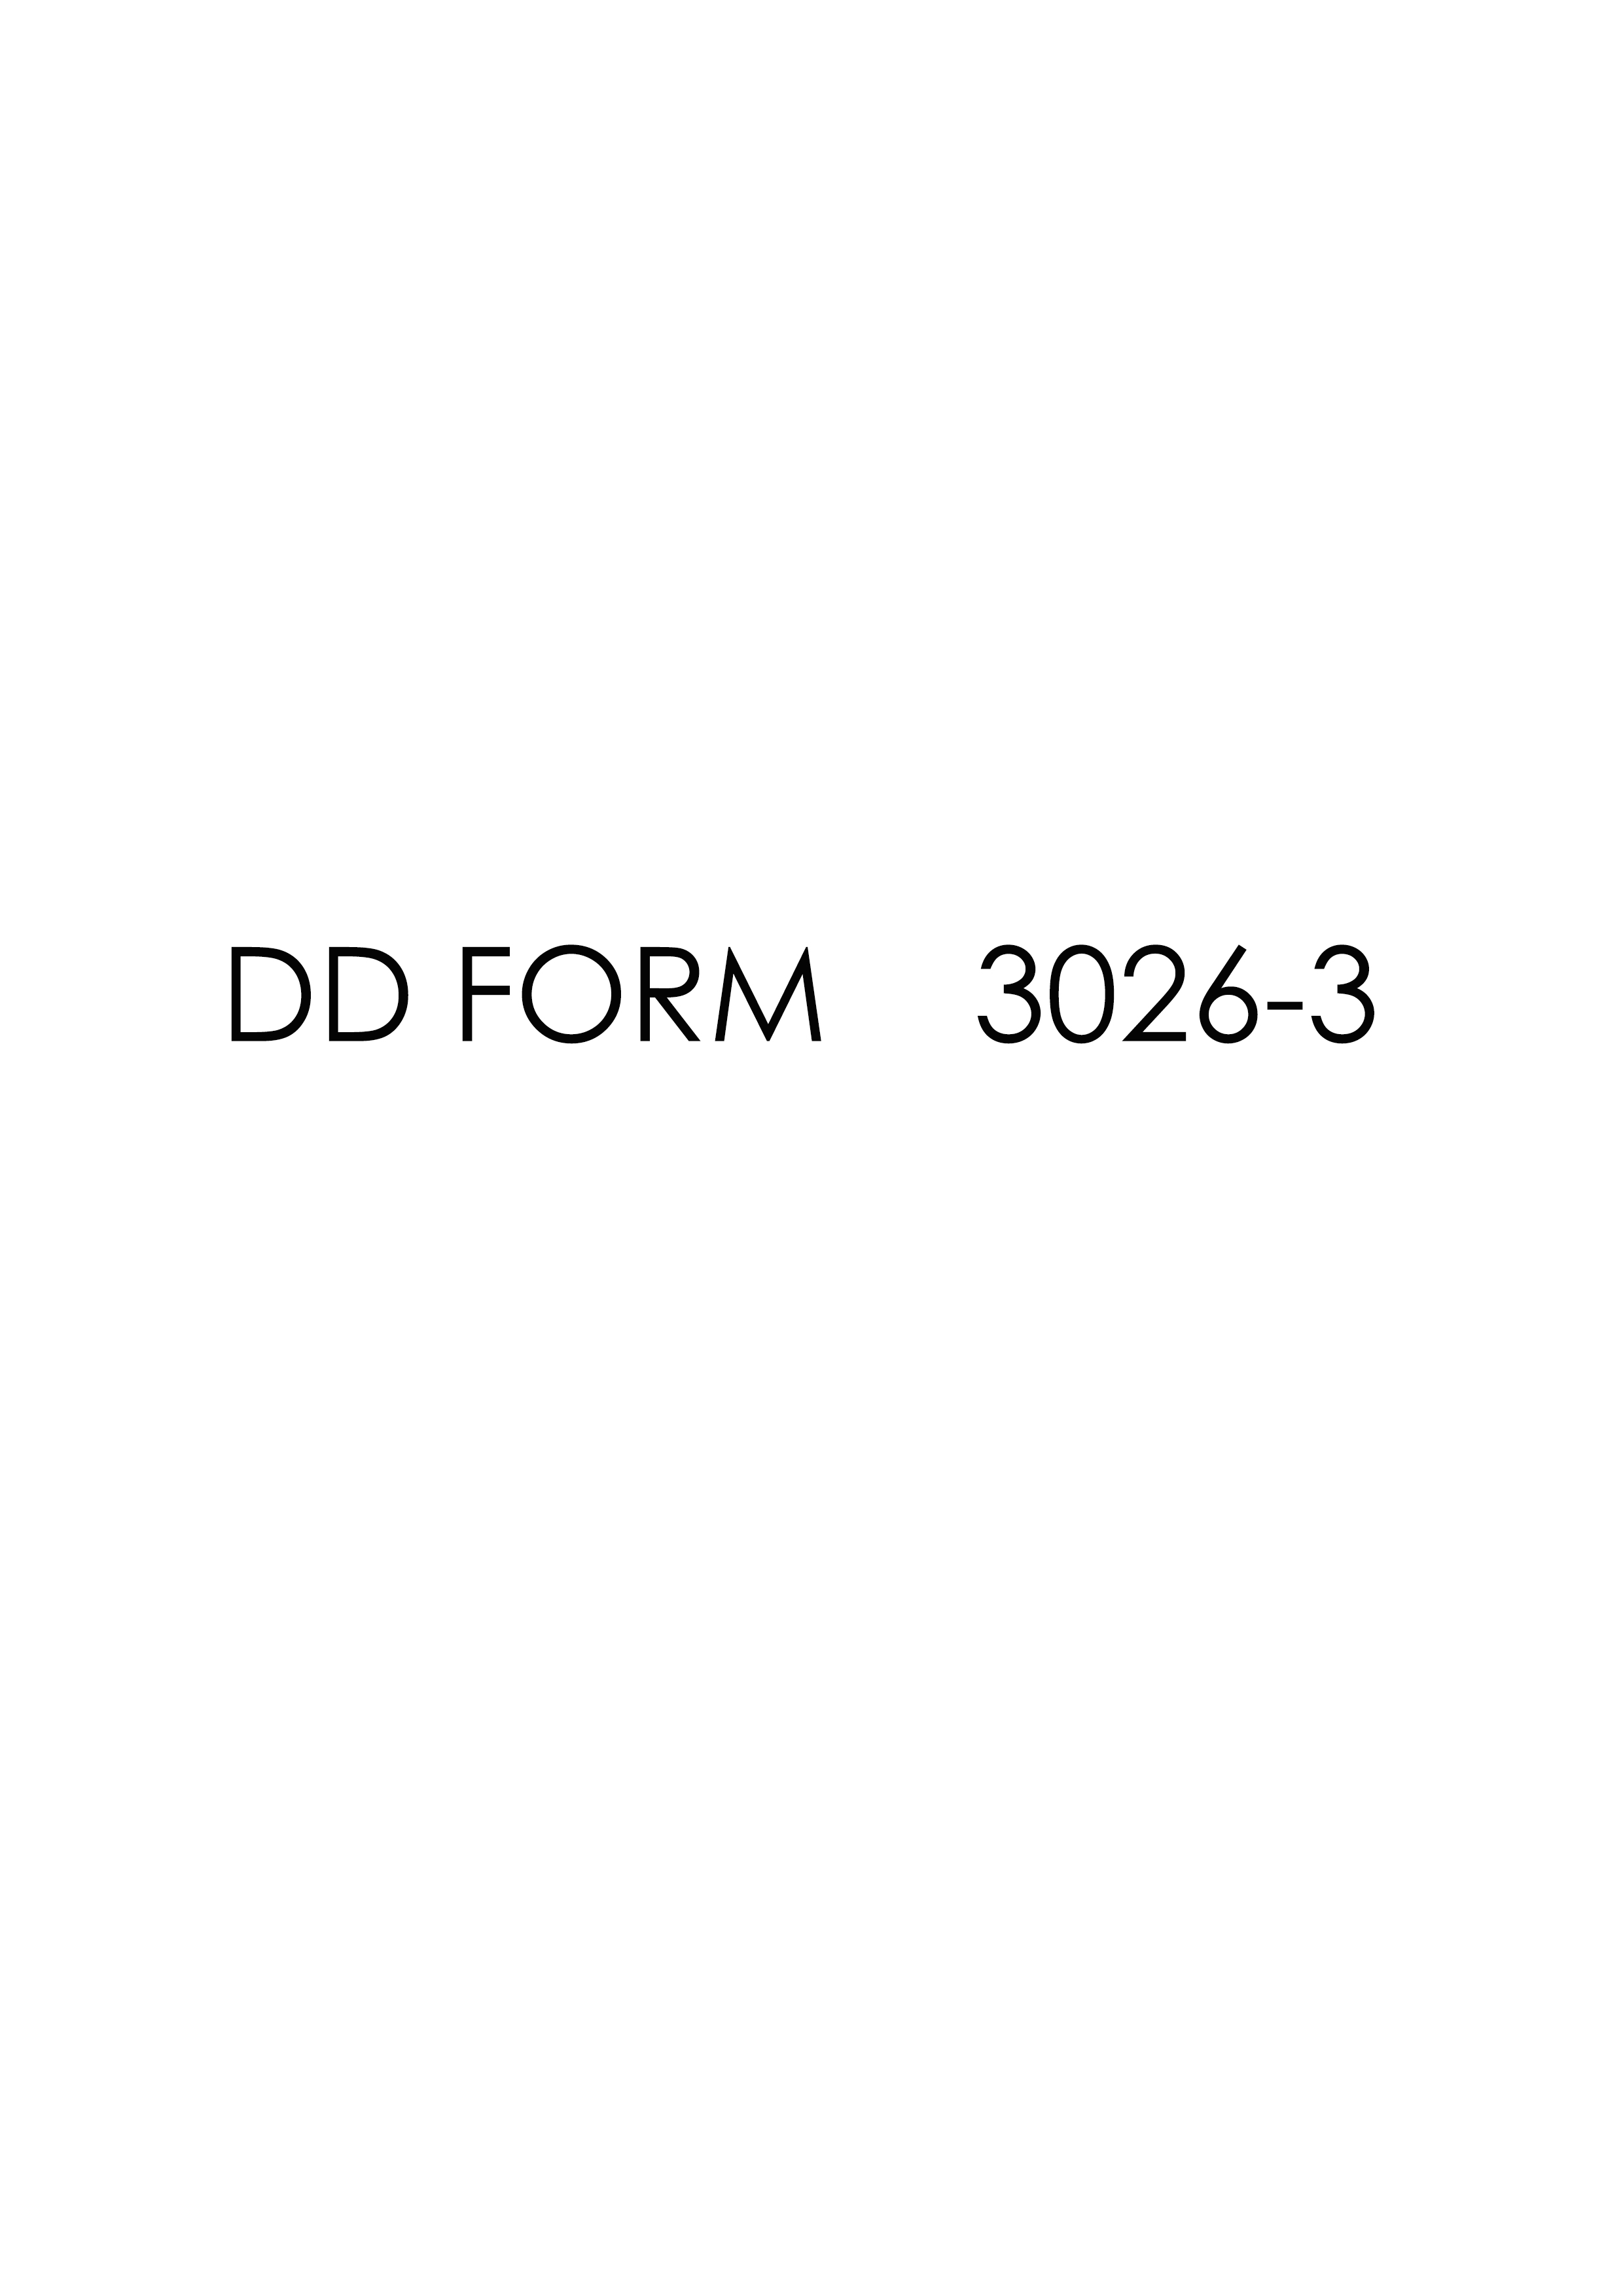 Download Fillable dd Form 3026-3